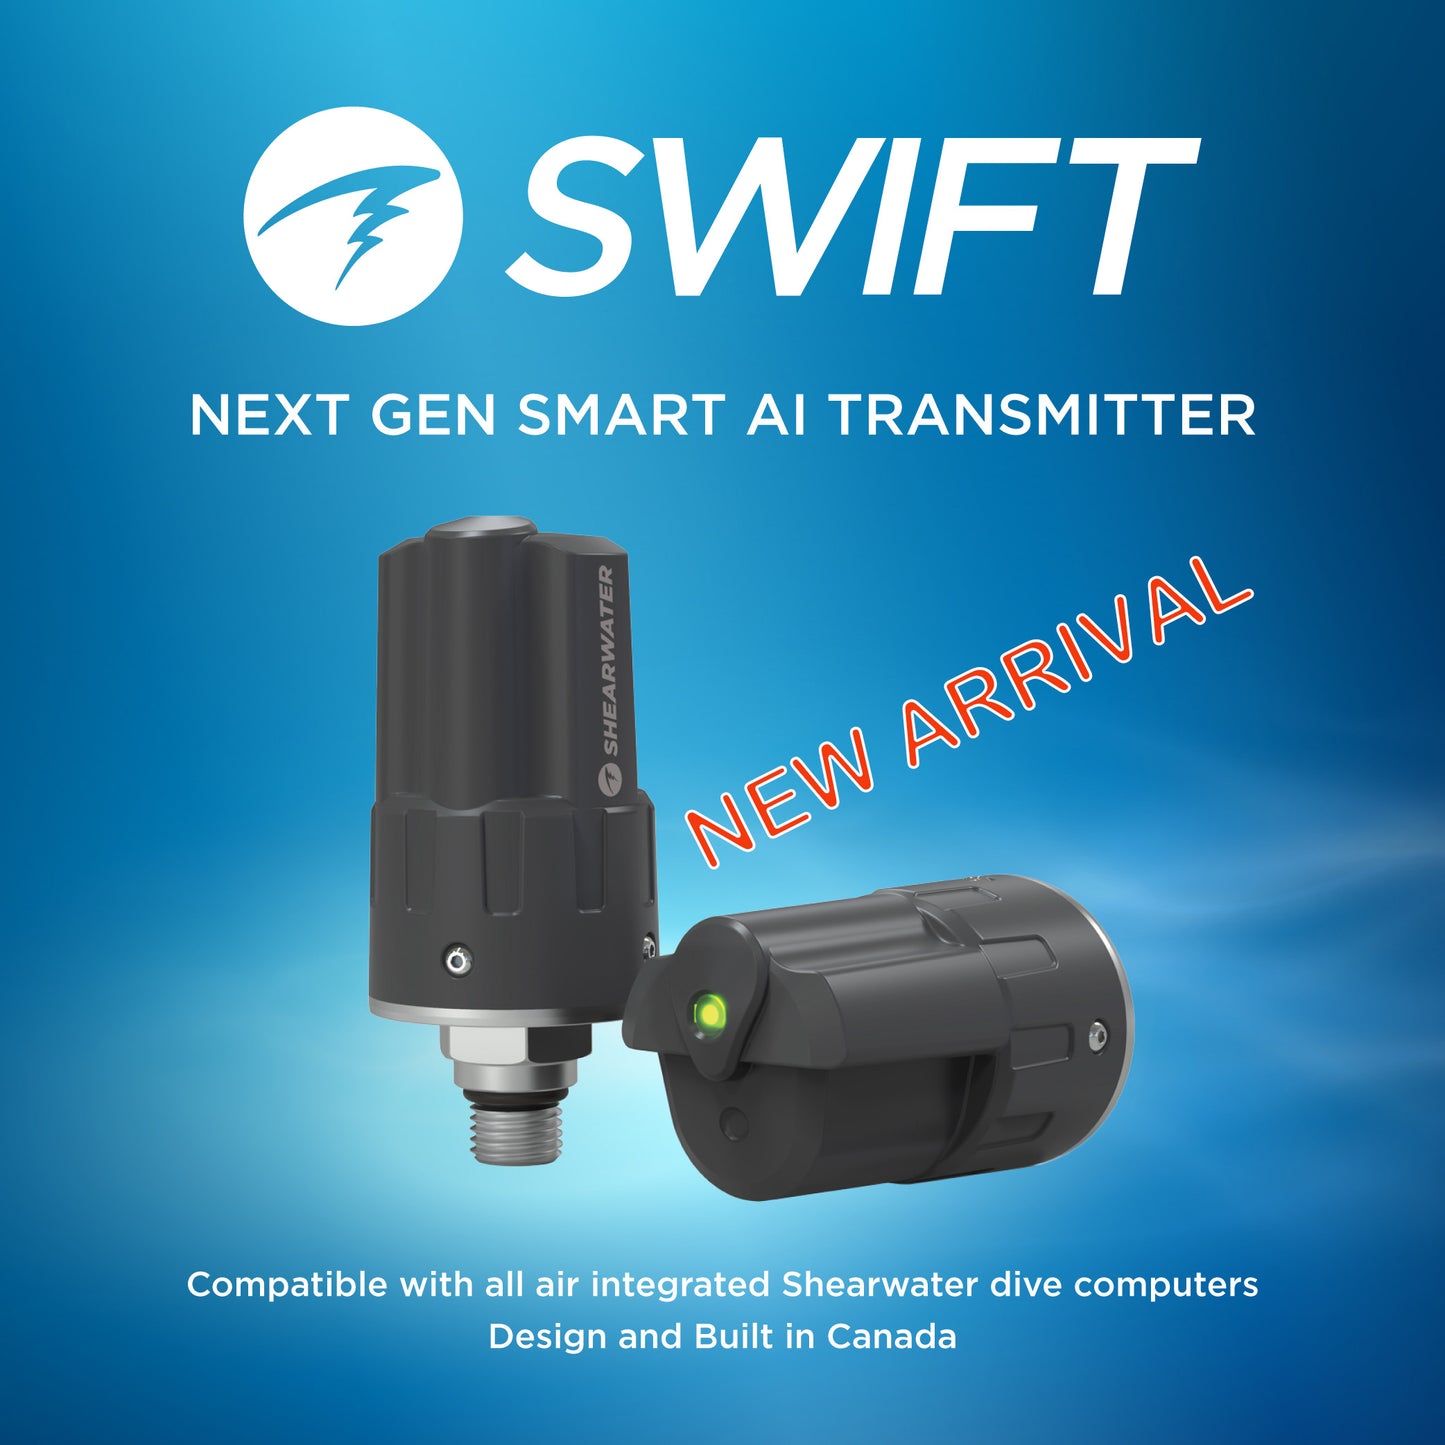 Shearwater Teric Dive Computer With Optional Swift Smart Transmitter